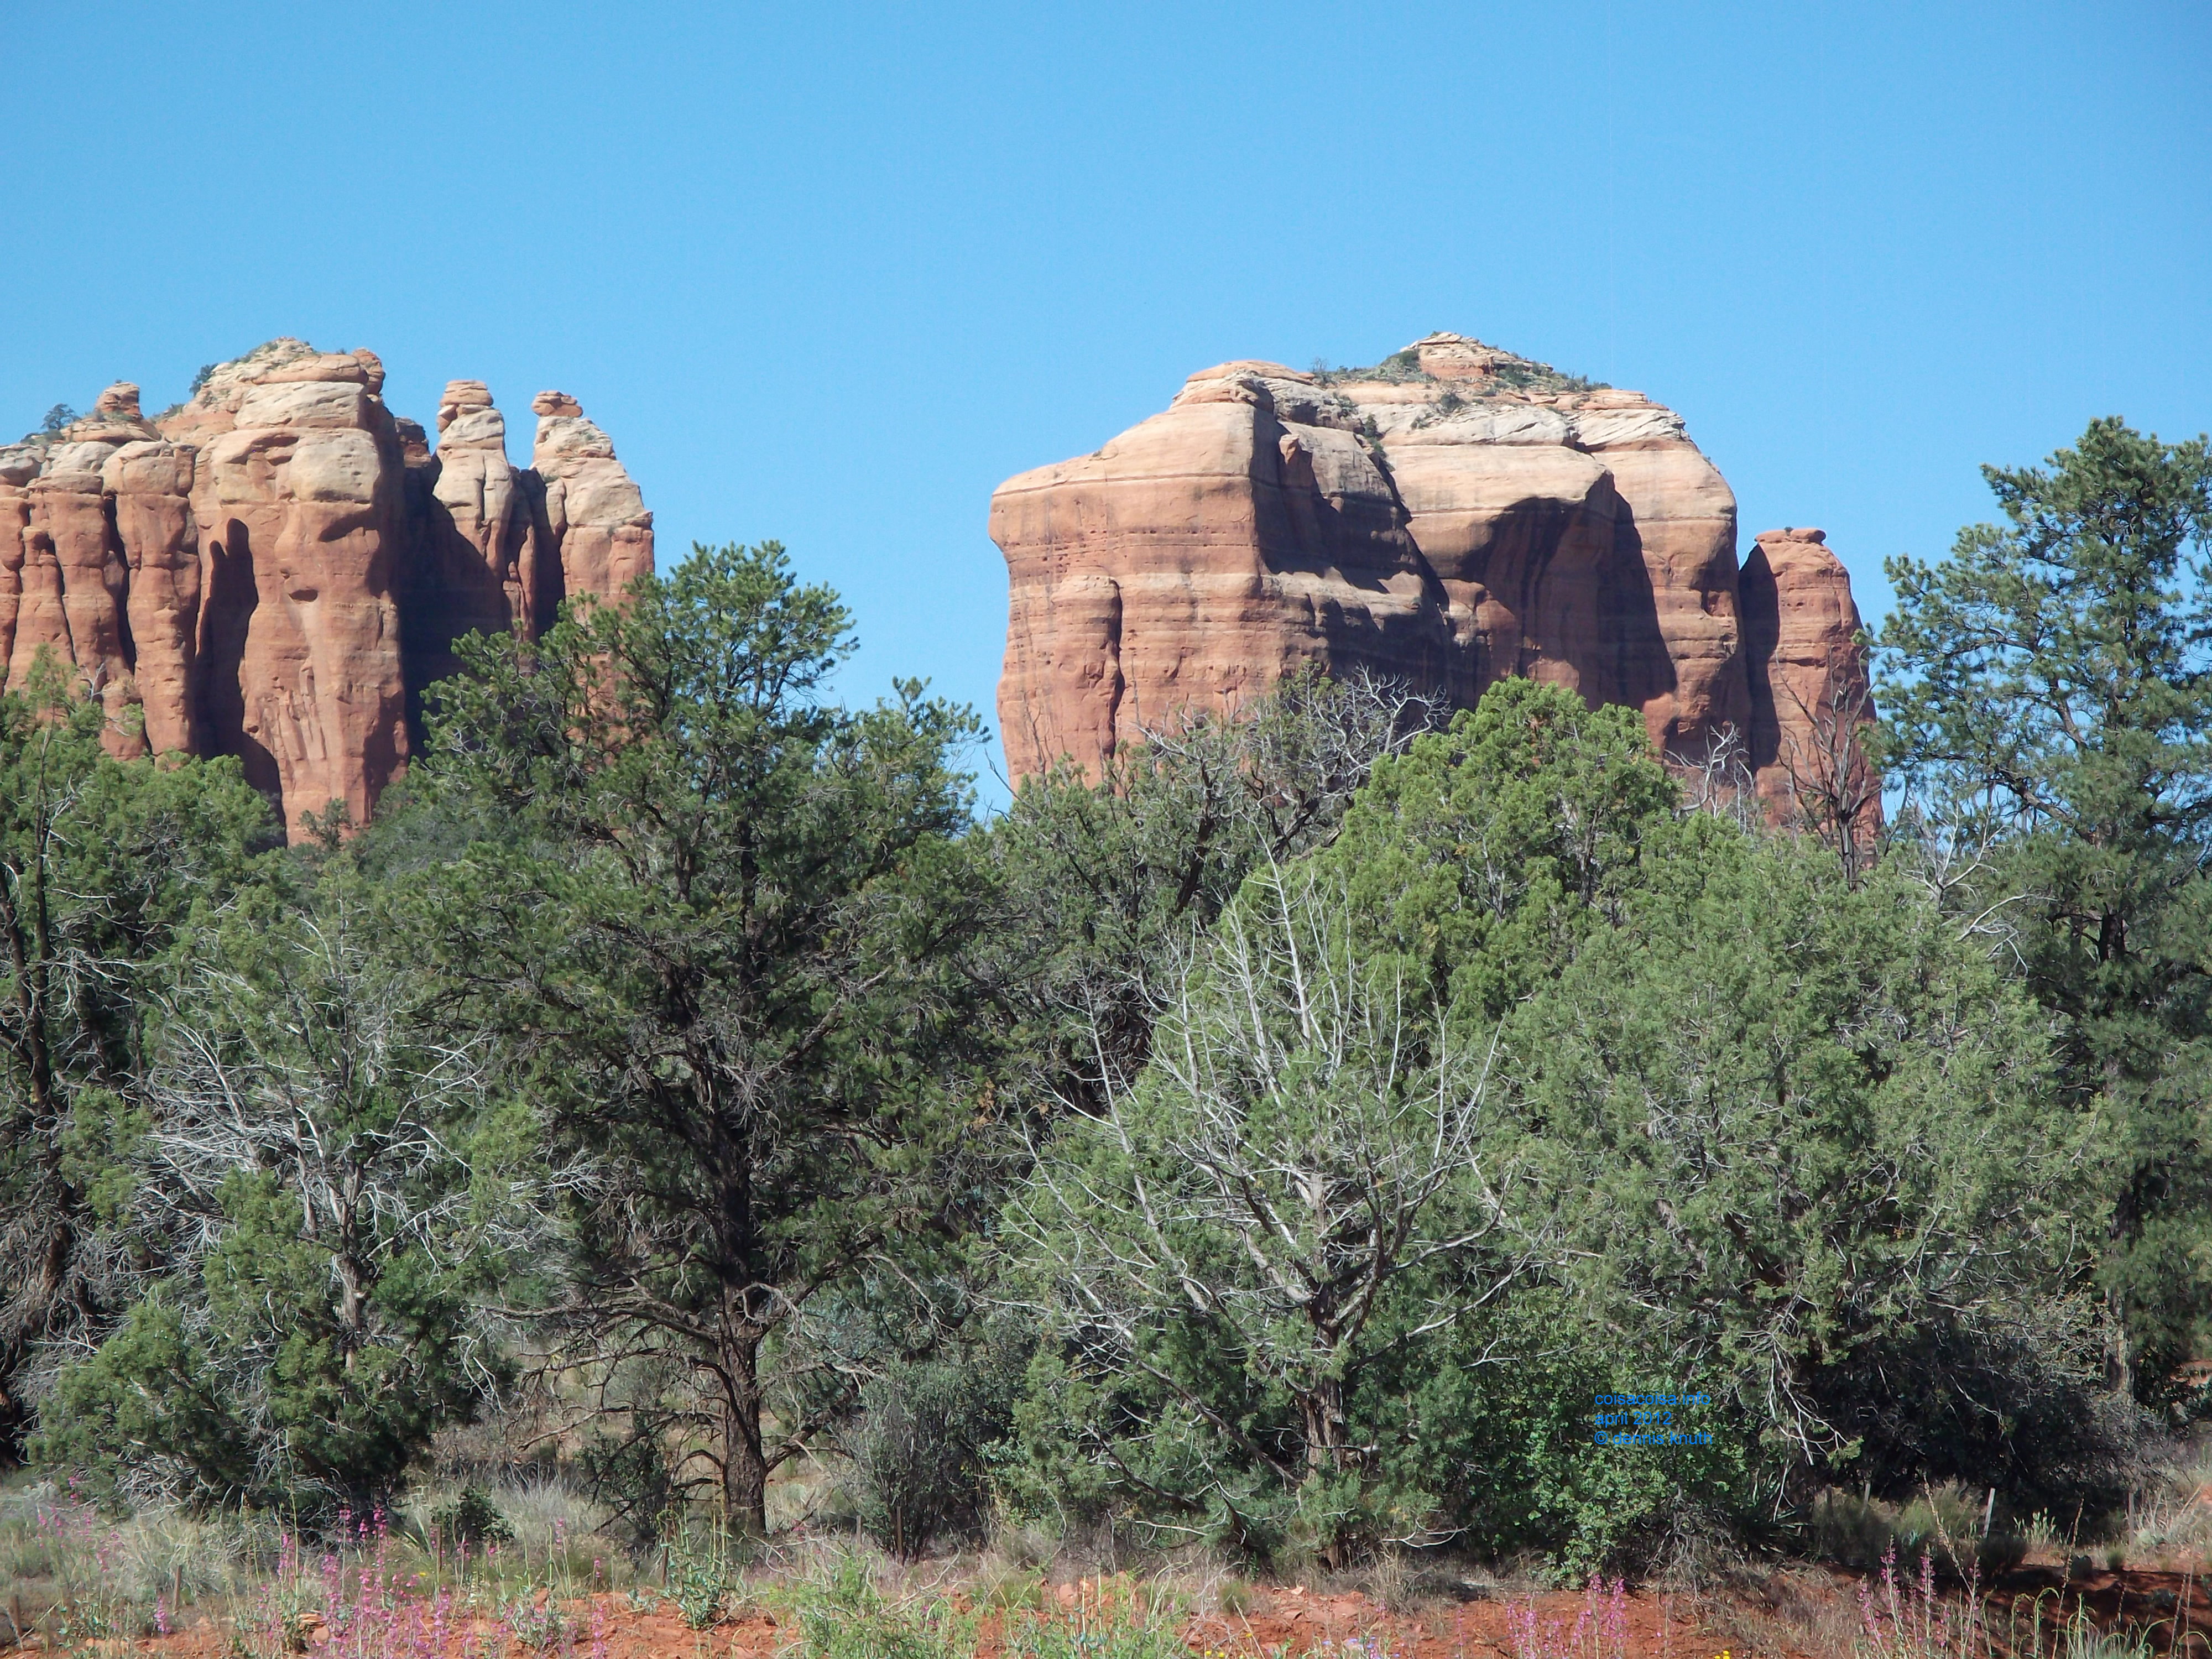 Pinnacles of Red Rock on the way to Sedona